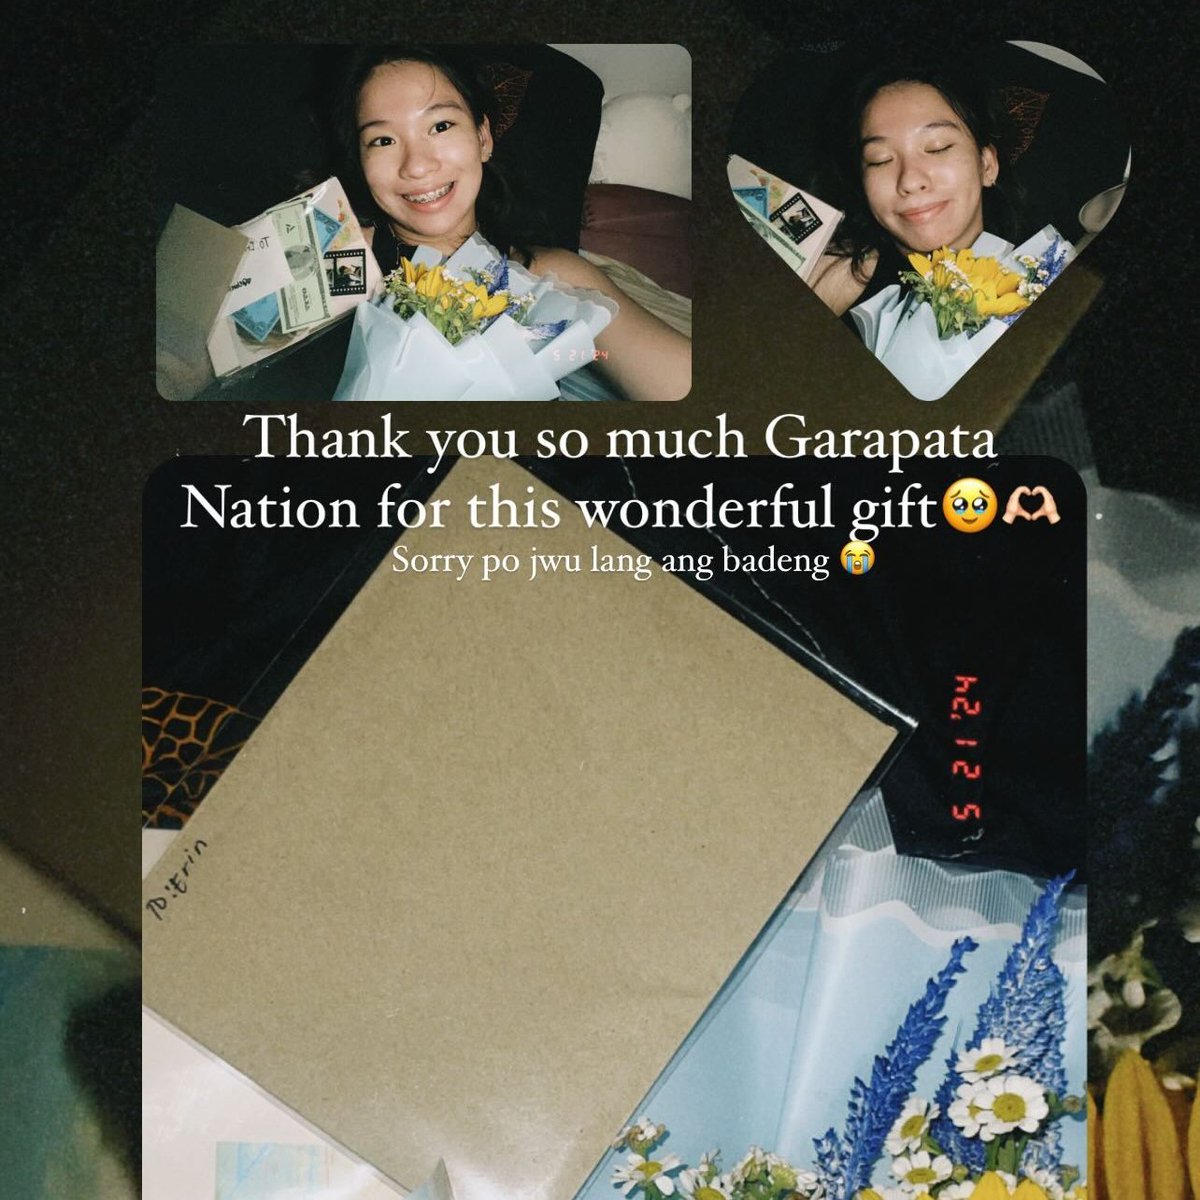 MUCH LOVE FROM THE GARAPATAS 🐶

#UAAPSeason86 women's volleyball champs NU Lady Bulldogs shared some congratulatory gifts from their supporters, also known as the 'Garapatas”.

#FuelingTheFuture

📸 Instagram stories | @vange_alinsug, @mhicaelabelen, @alyssajaeee, @erinmaypangi